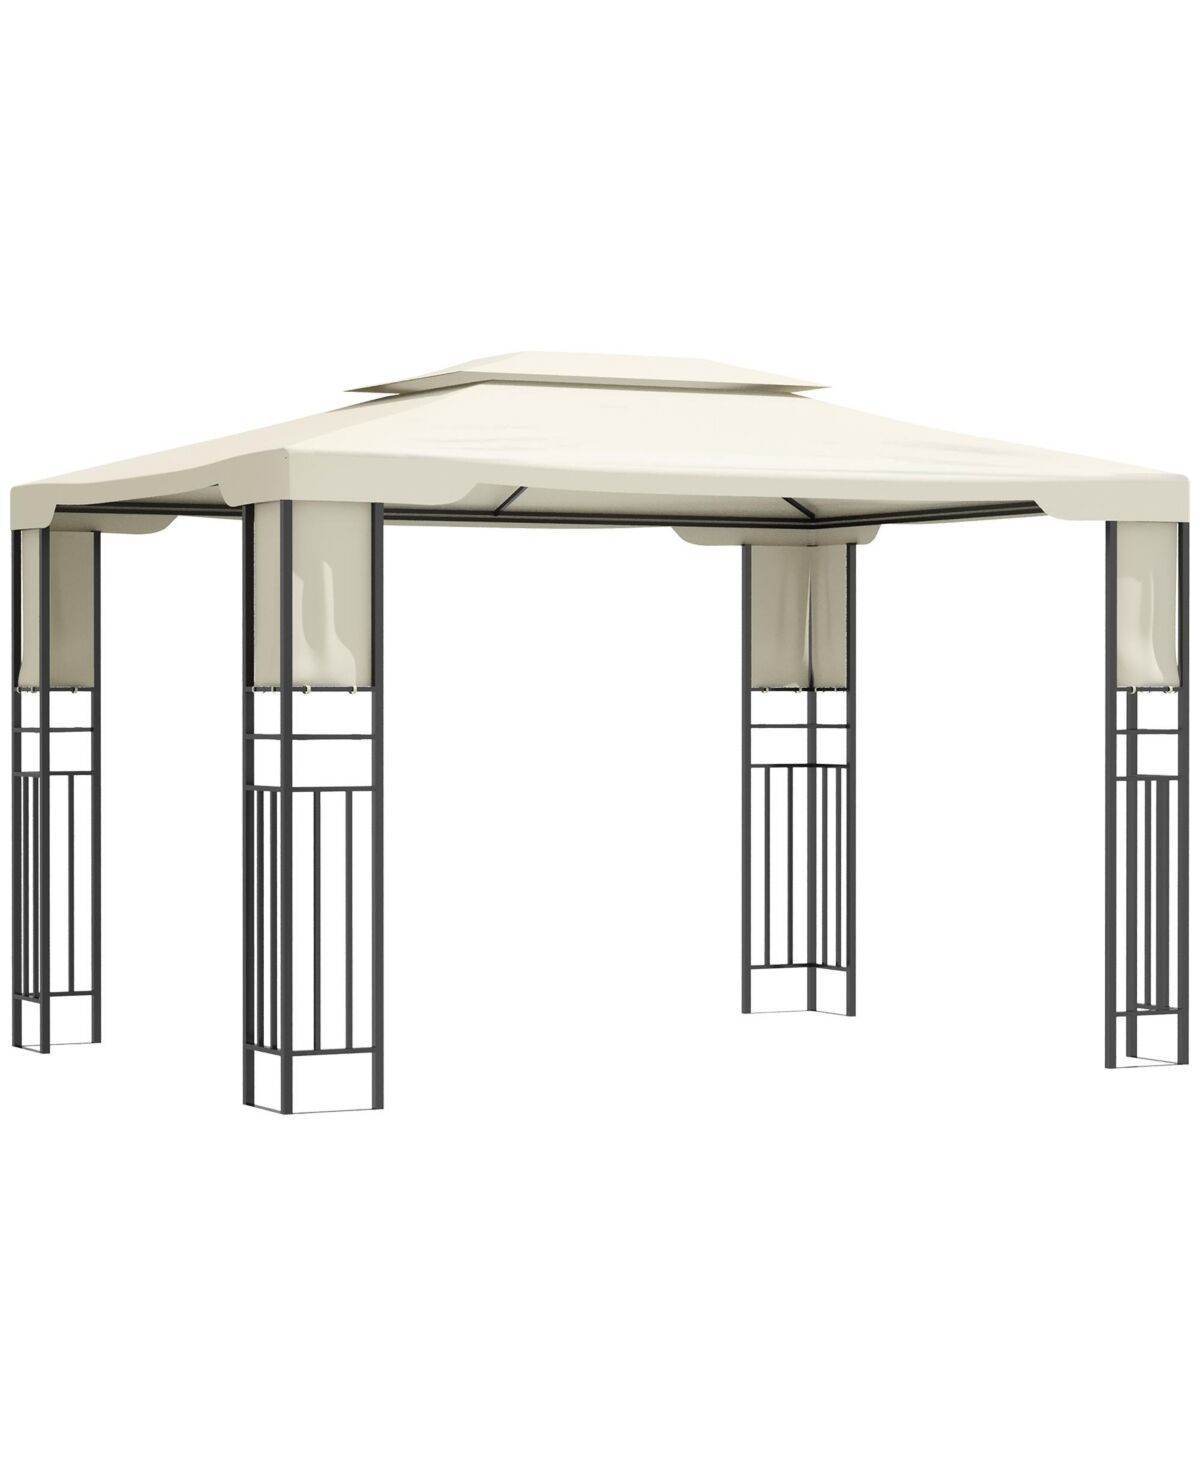 Outsunny 13' x 10' Patio Gazebo Outdoor Canopy Shelter with Double Vented Roof, Storage Shelves, Steel Frame for Lawn, Backyard and Deck, Cream White